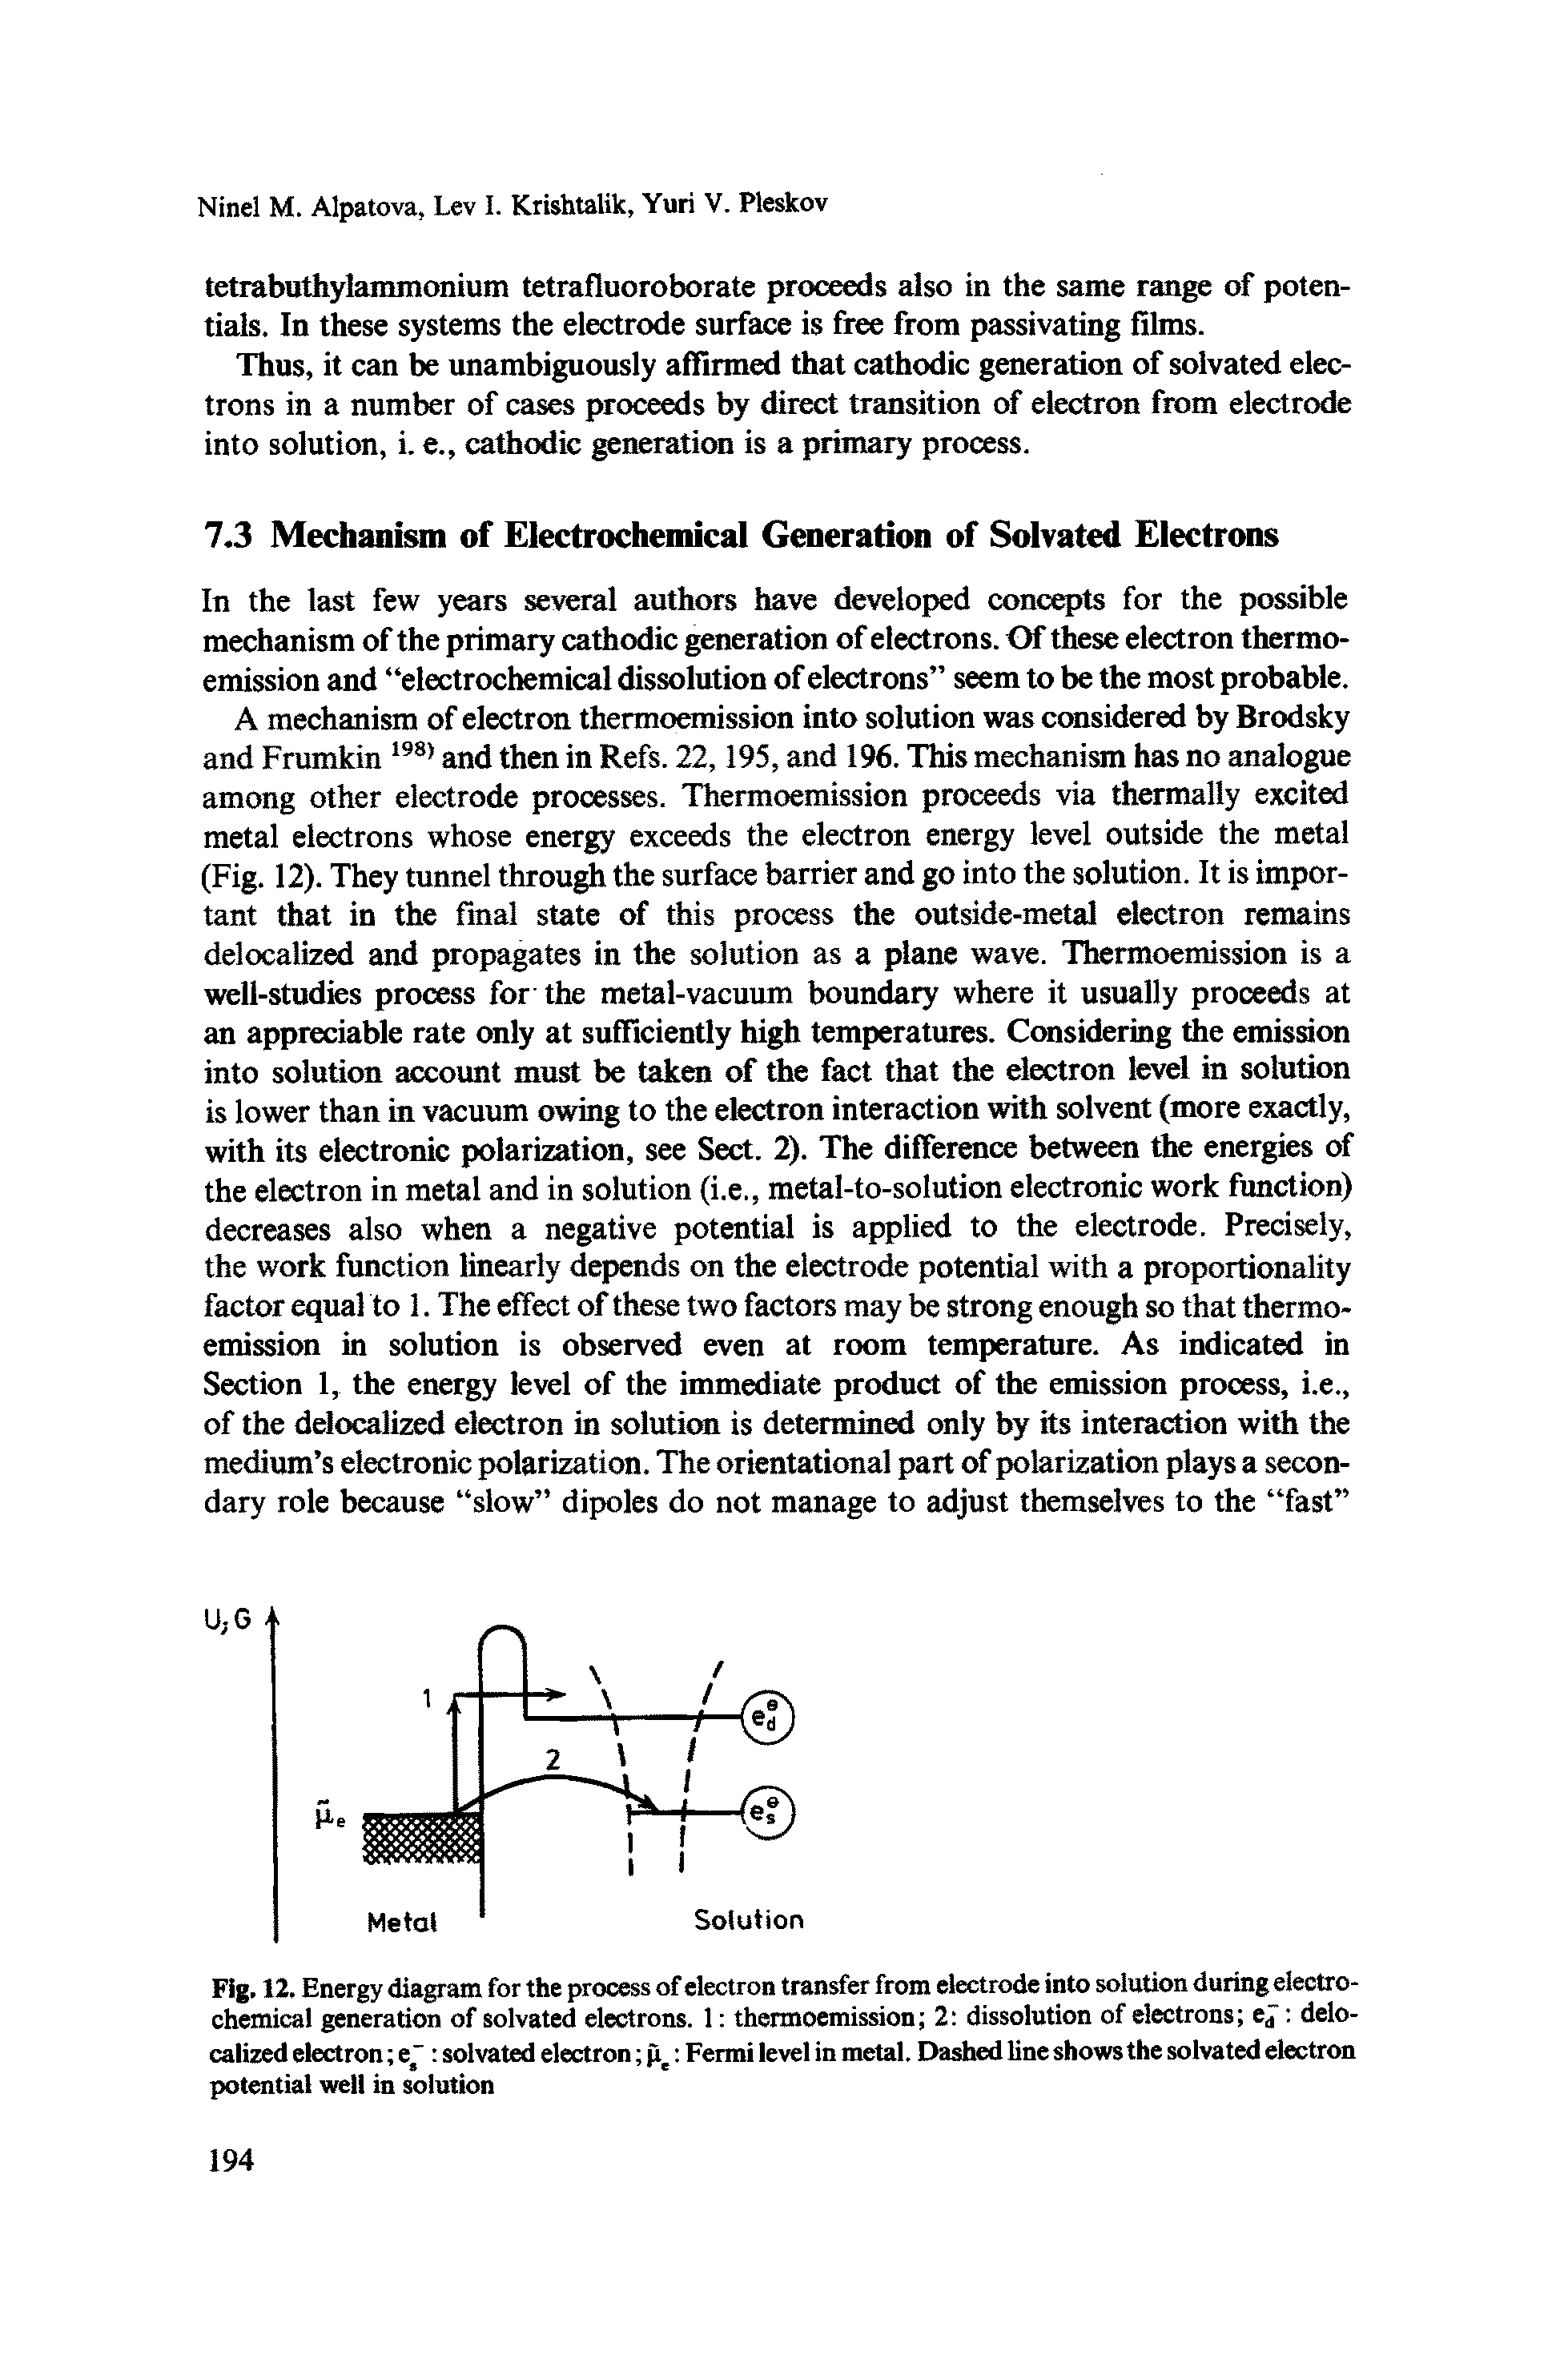 Fig. 12. Energy diagram for the process of electron transfer from electrode into solution during electrochemical generation of solvated electrons. 1 thermoemission 2 dissolution of electrons ej delocalized electron e solvated electron Fermi level in metal. Dashed line shows the solvated electron potential well in solution...